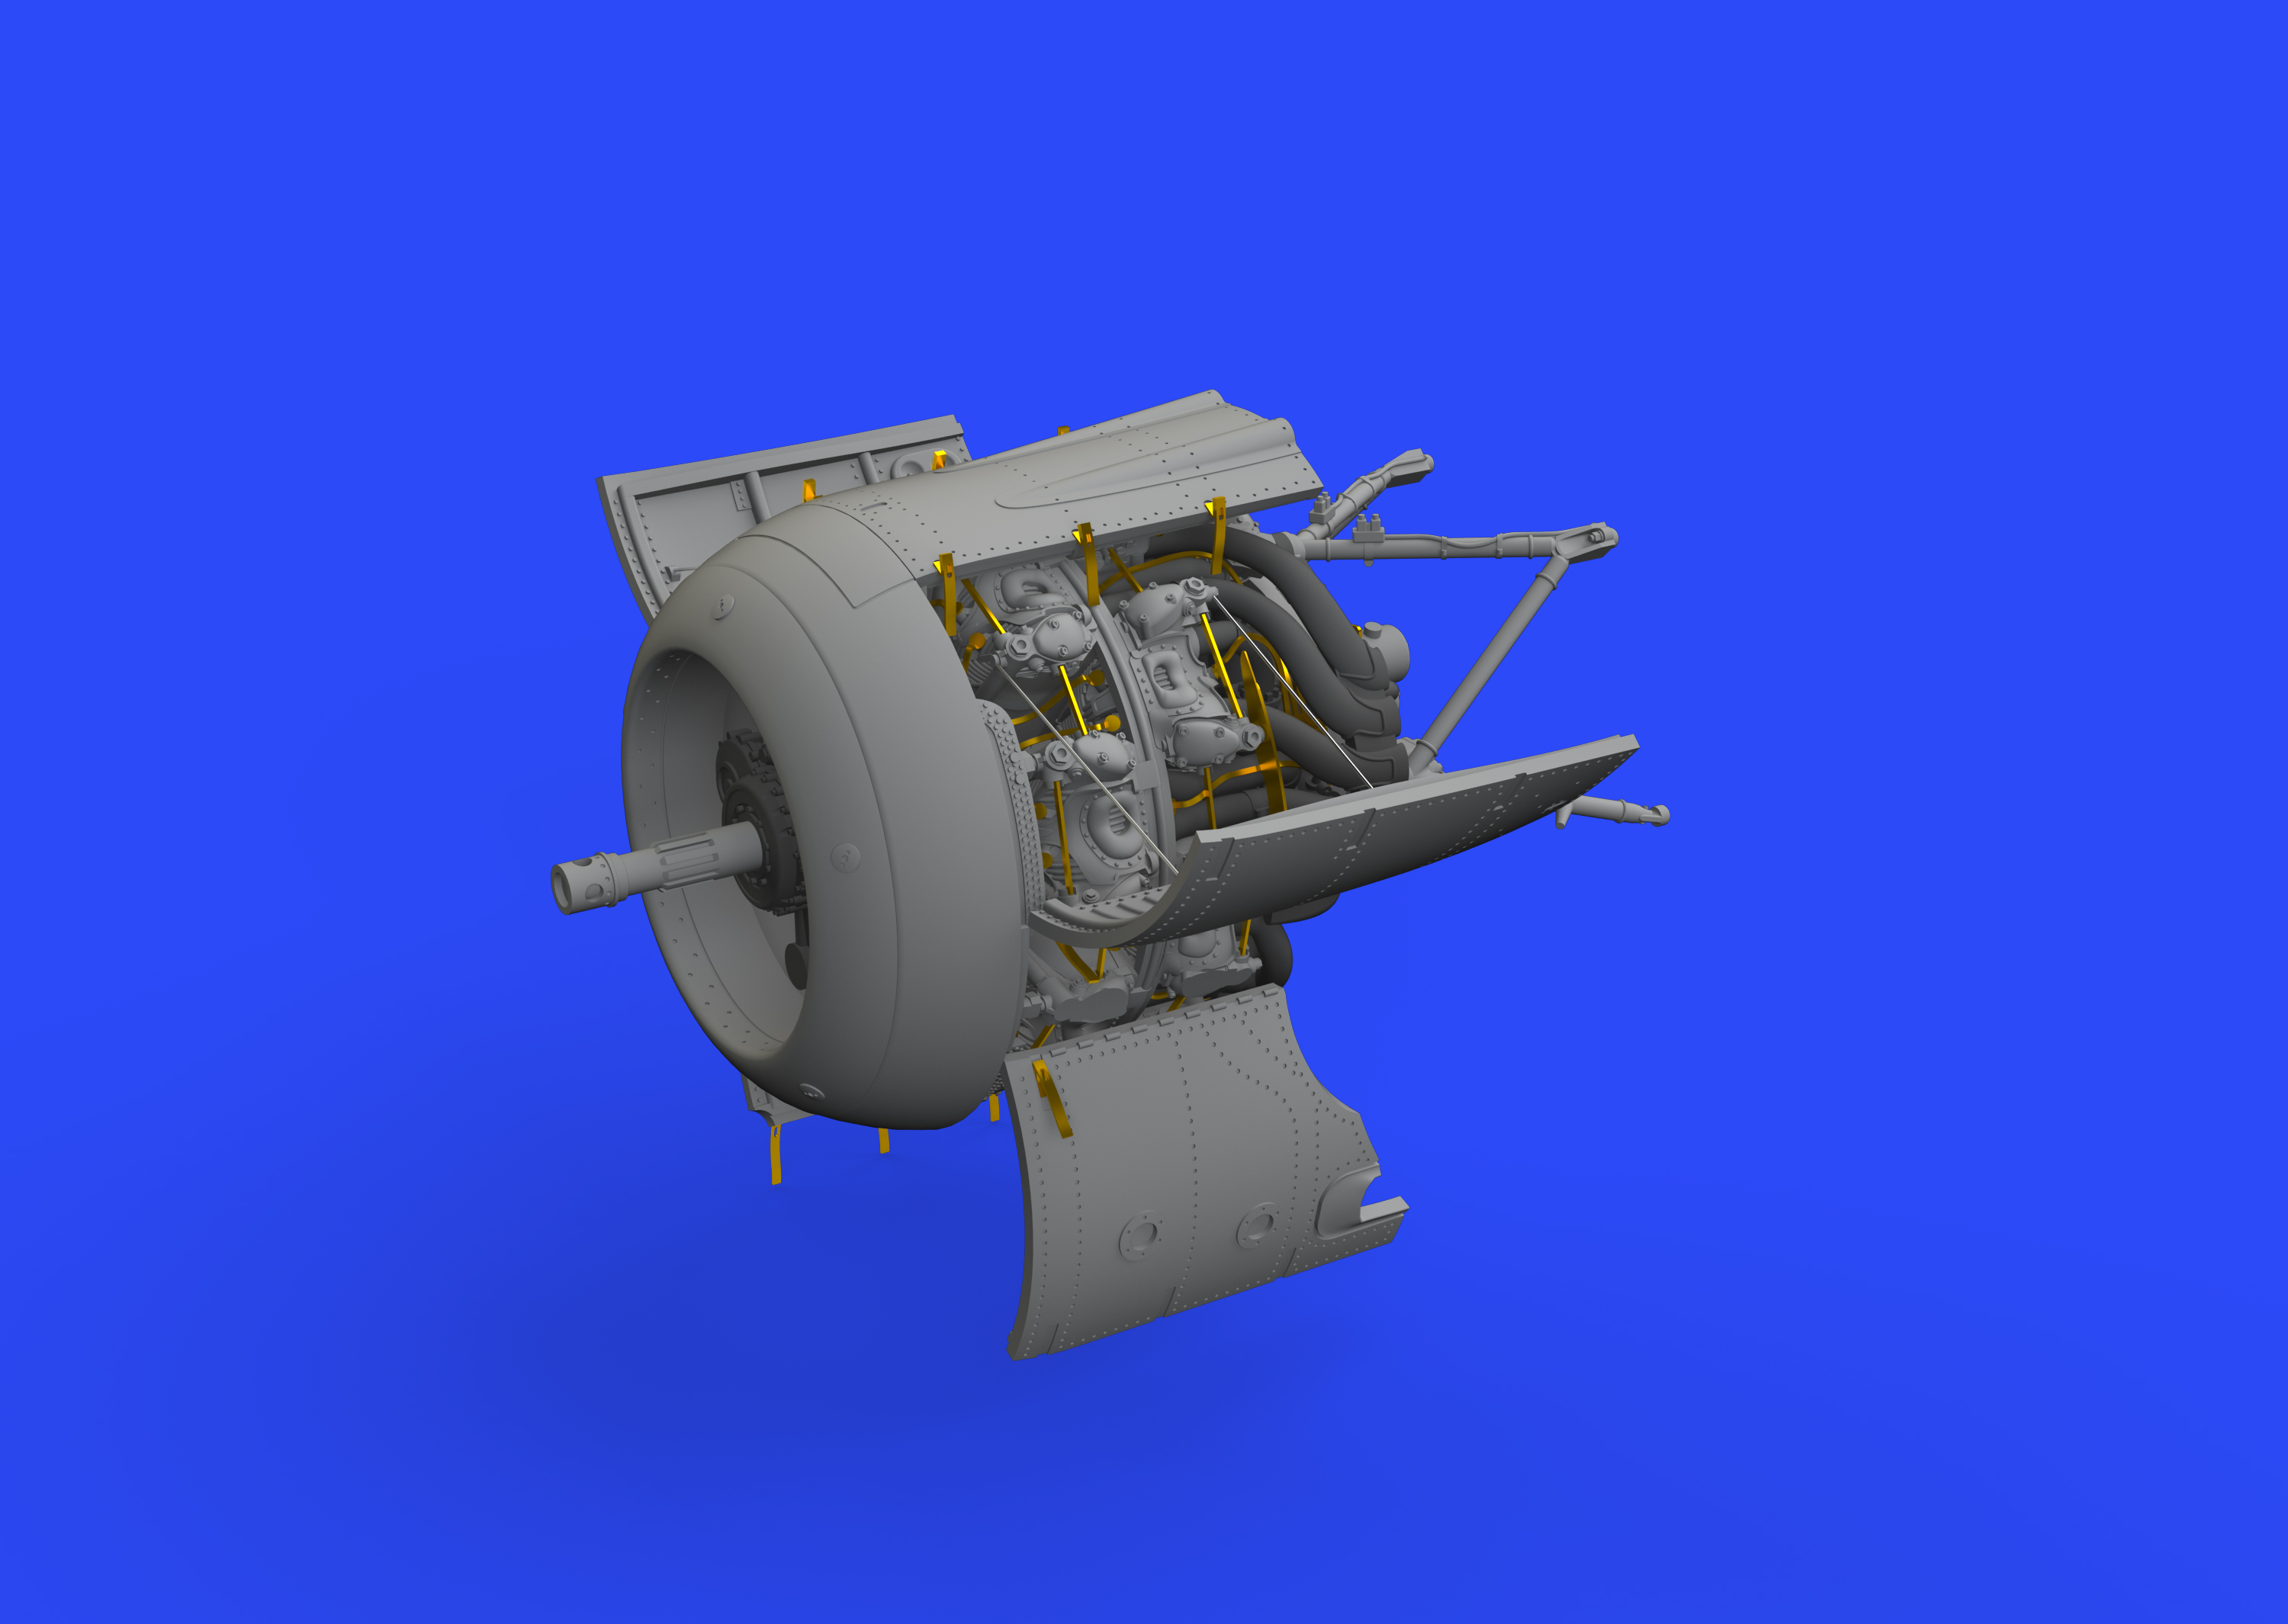 Additions (3D resin printing) 1/48 Focke-Wulf Fw-190A-8/R2 engine (designed to be used with Eduard kits) 